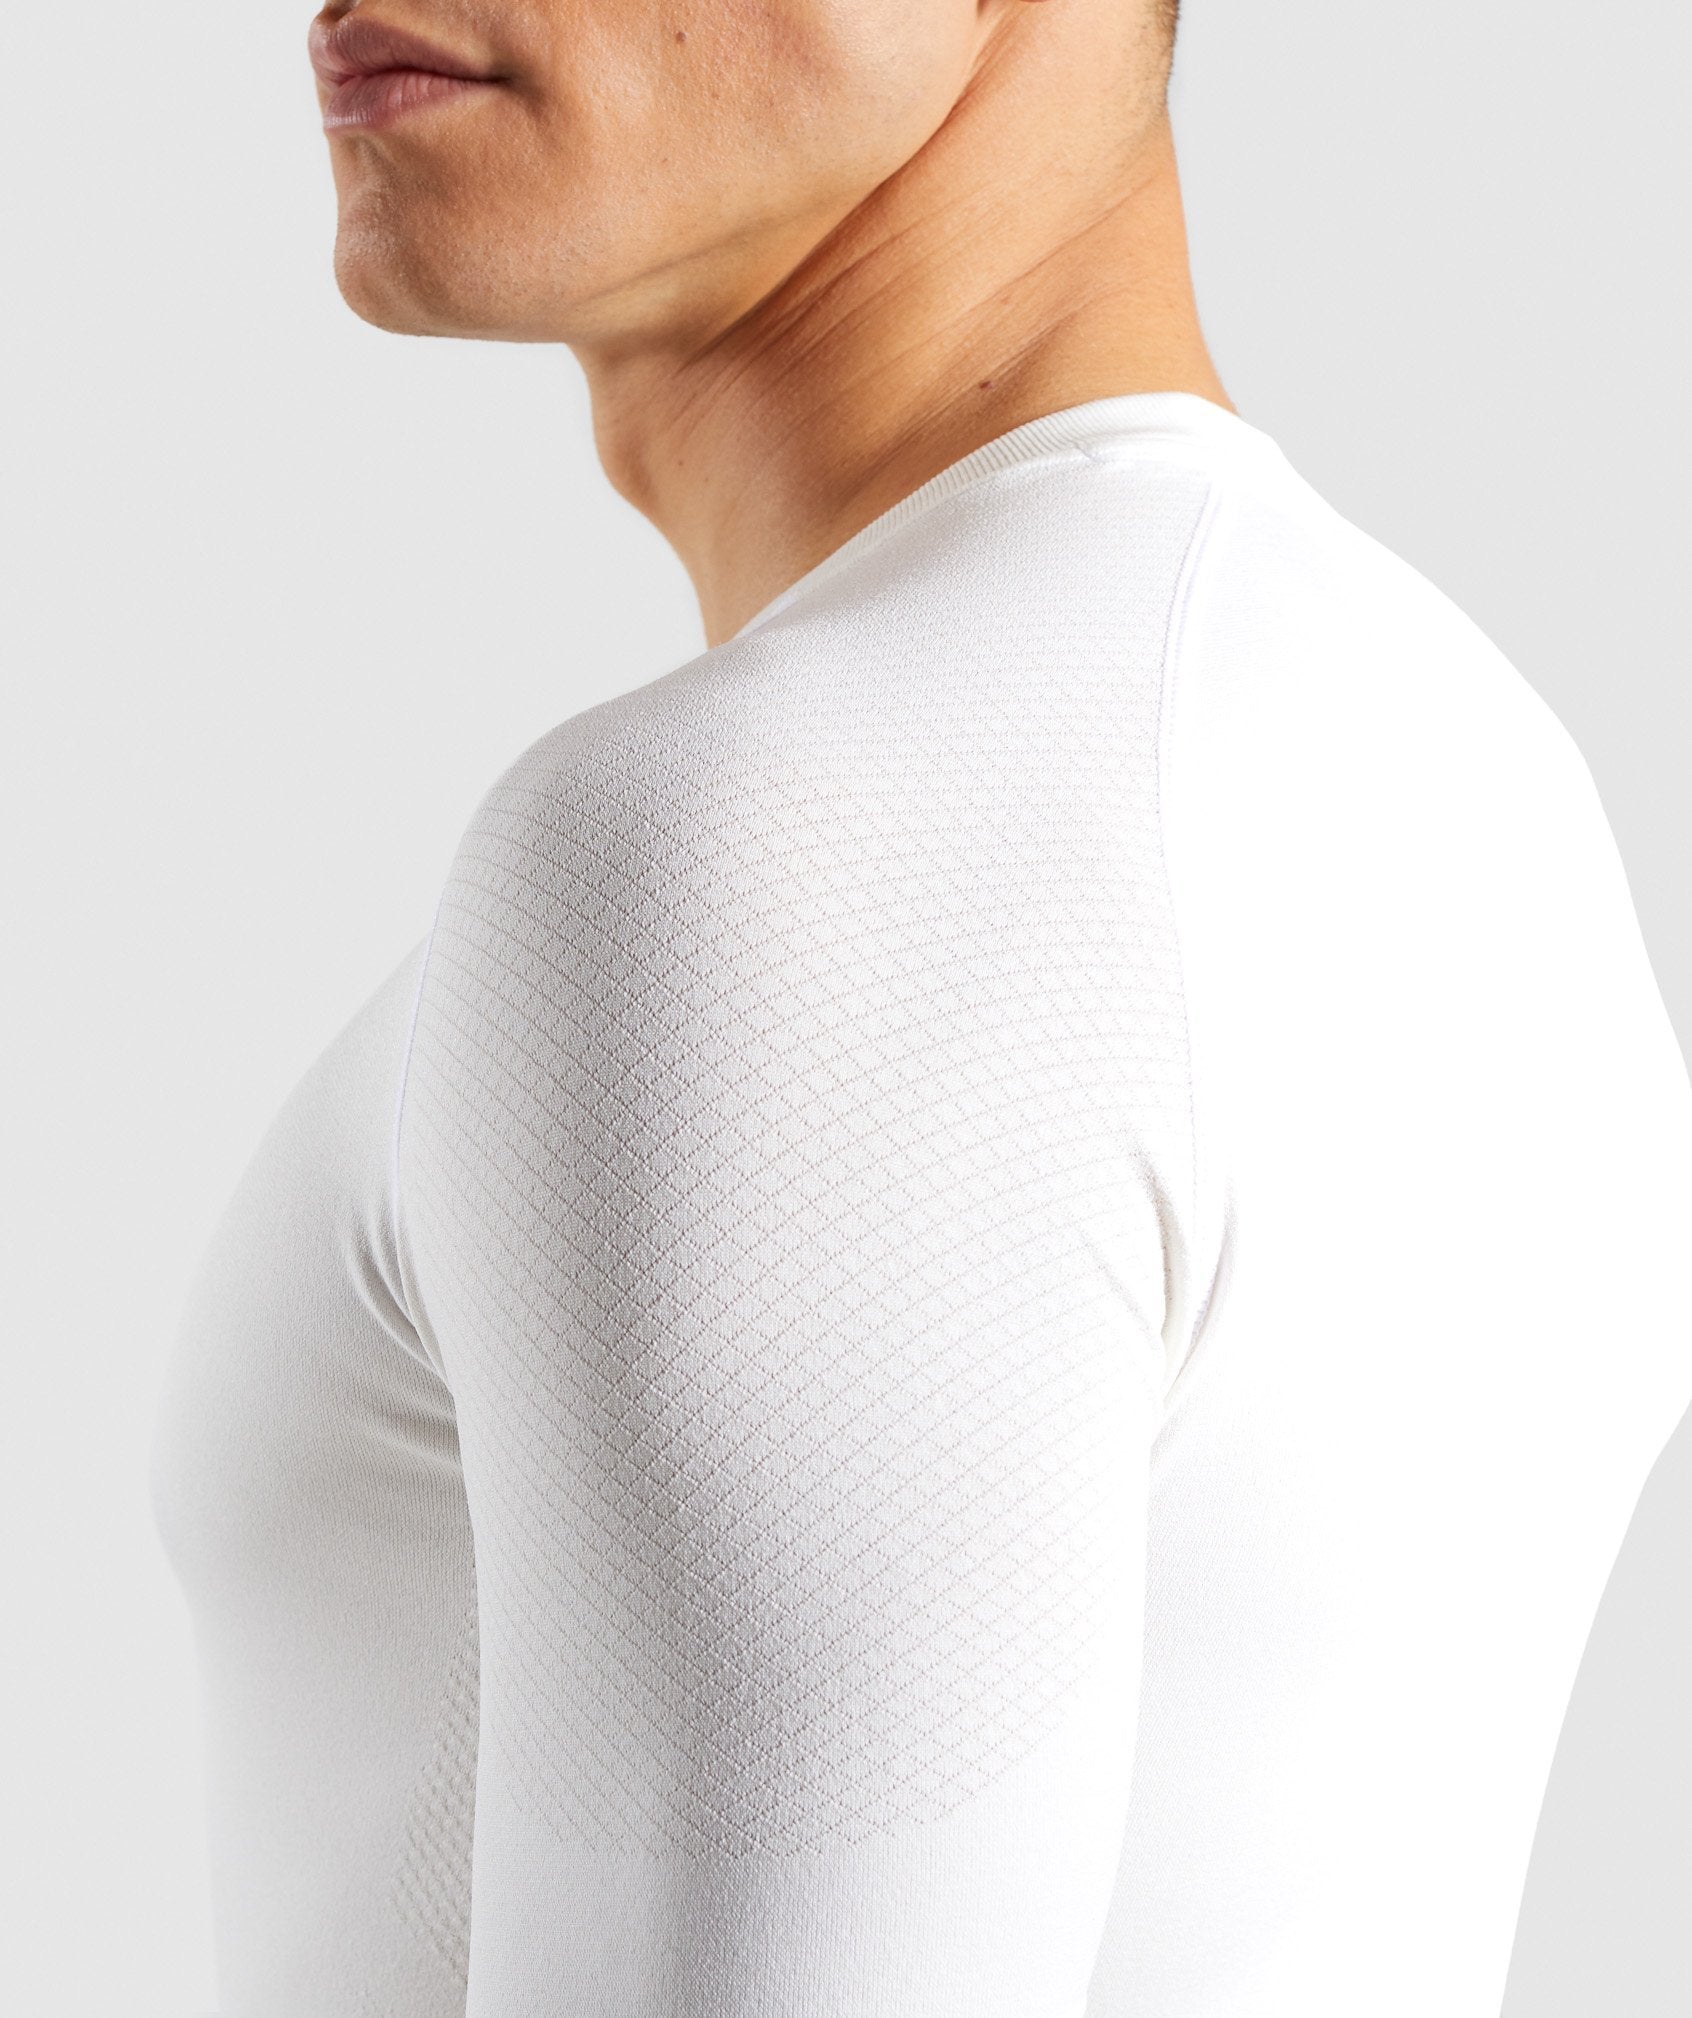 Define Seamless T-Shirt in White - view 6